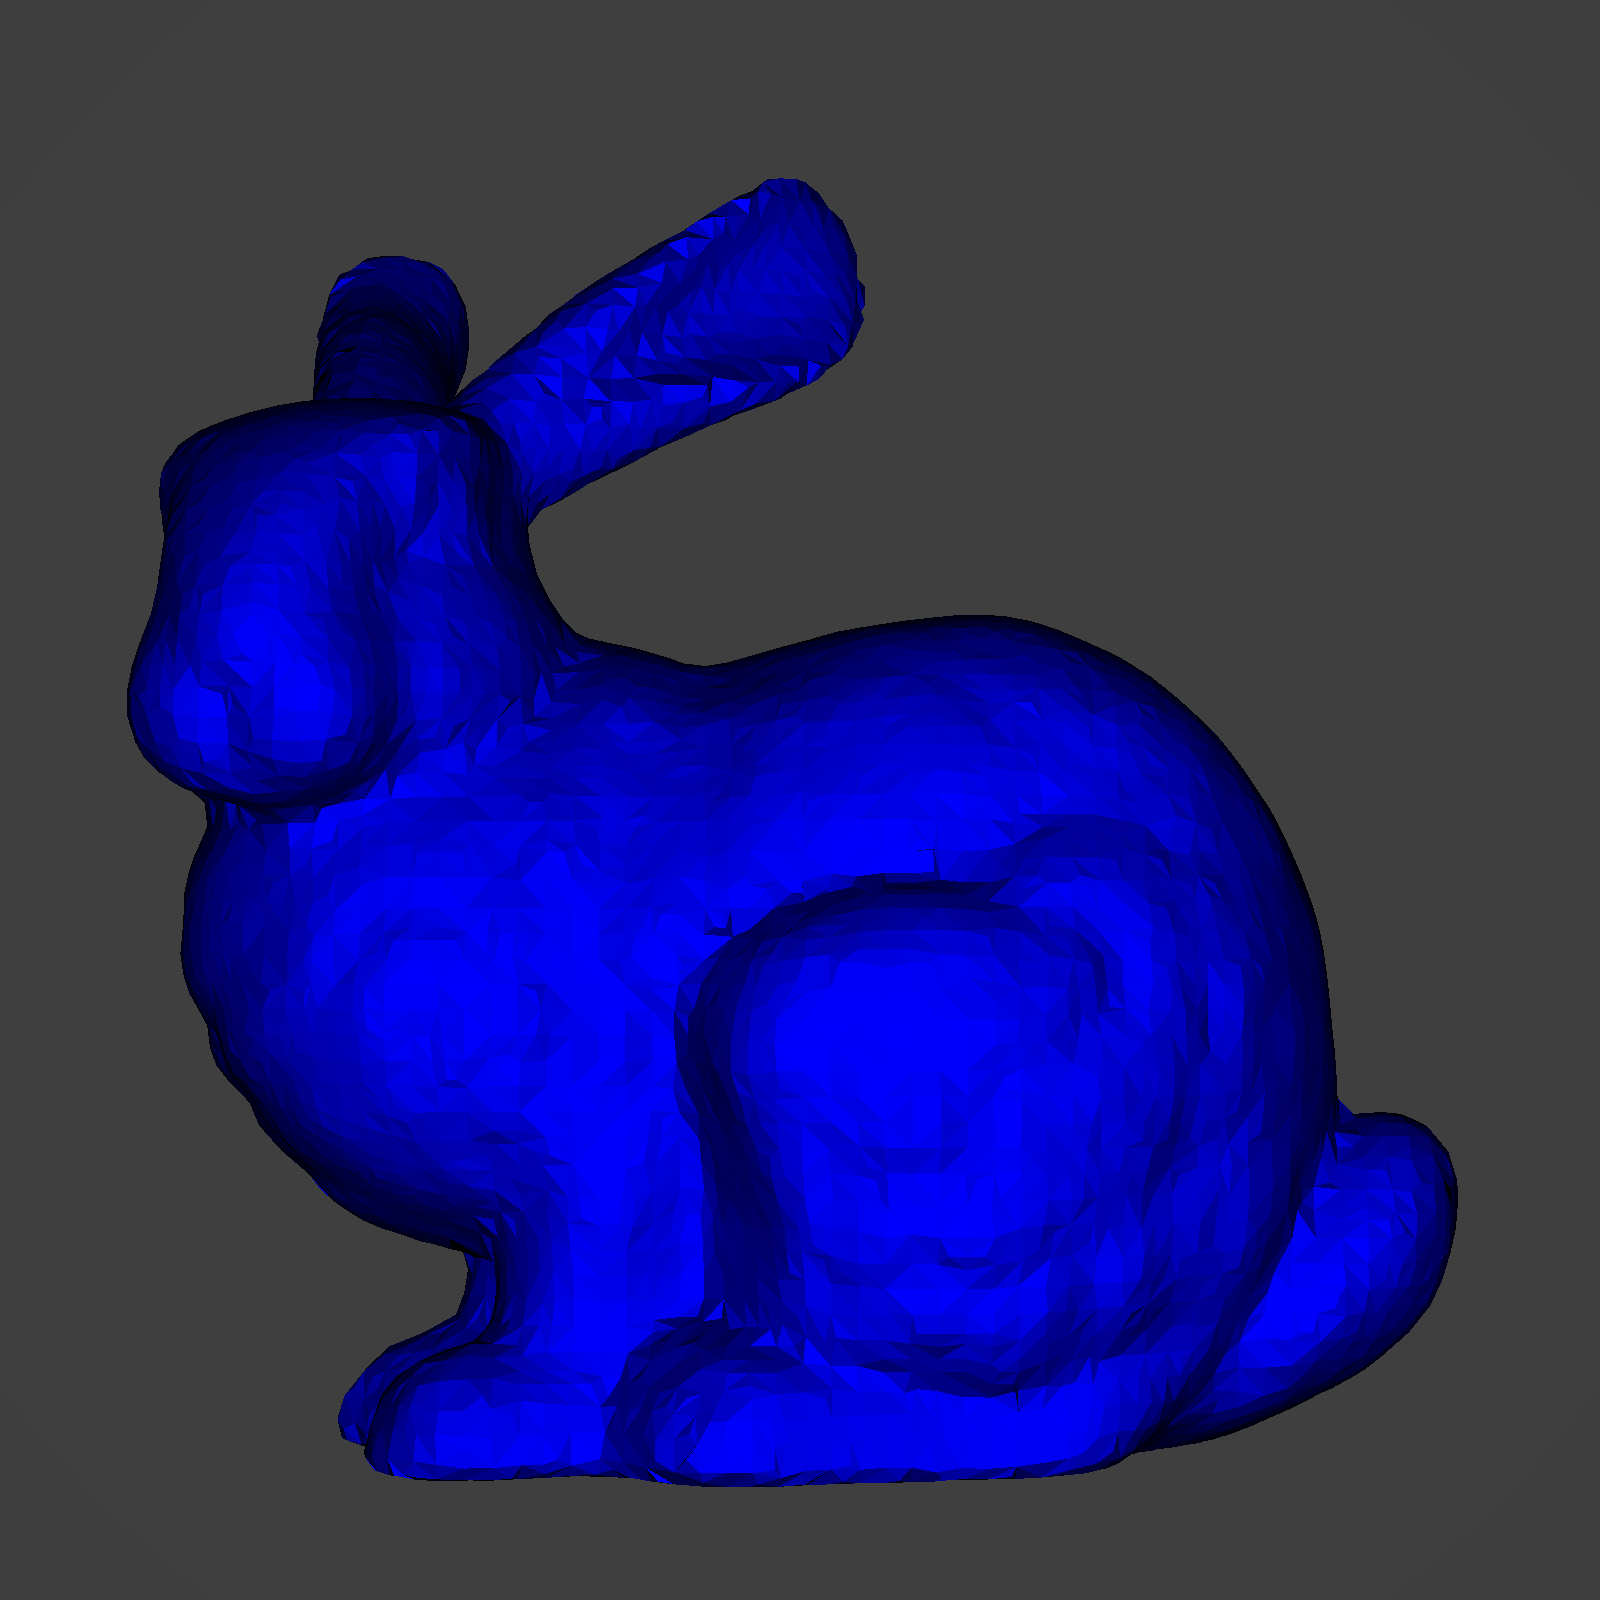 Stanford bunny with flat shading